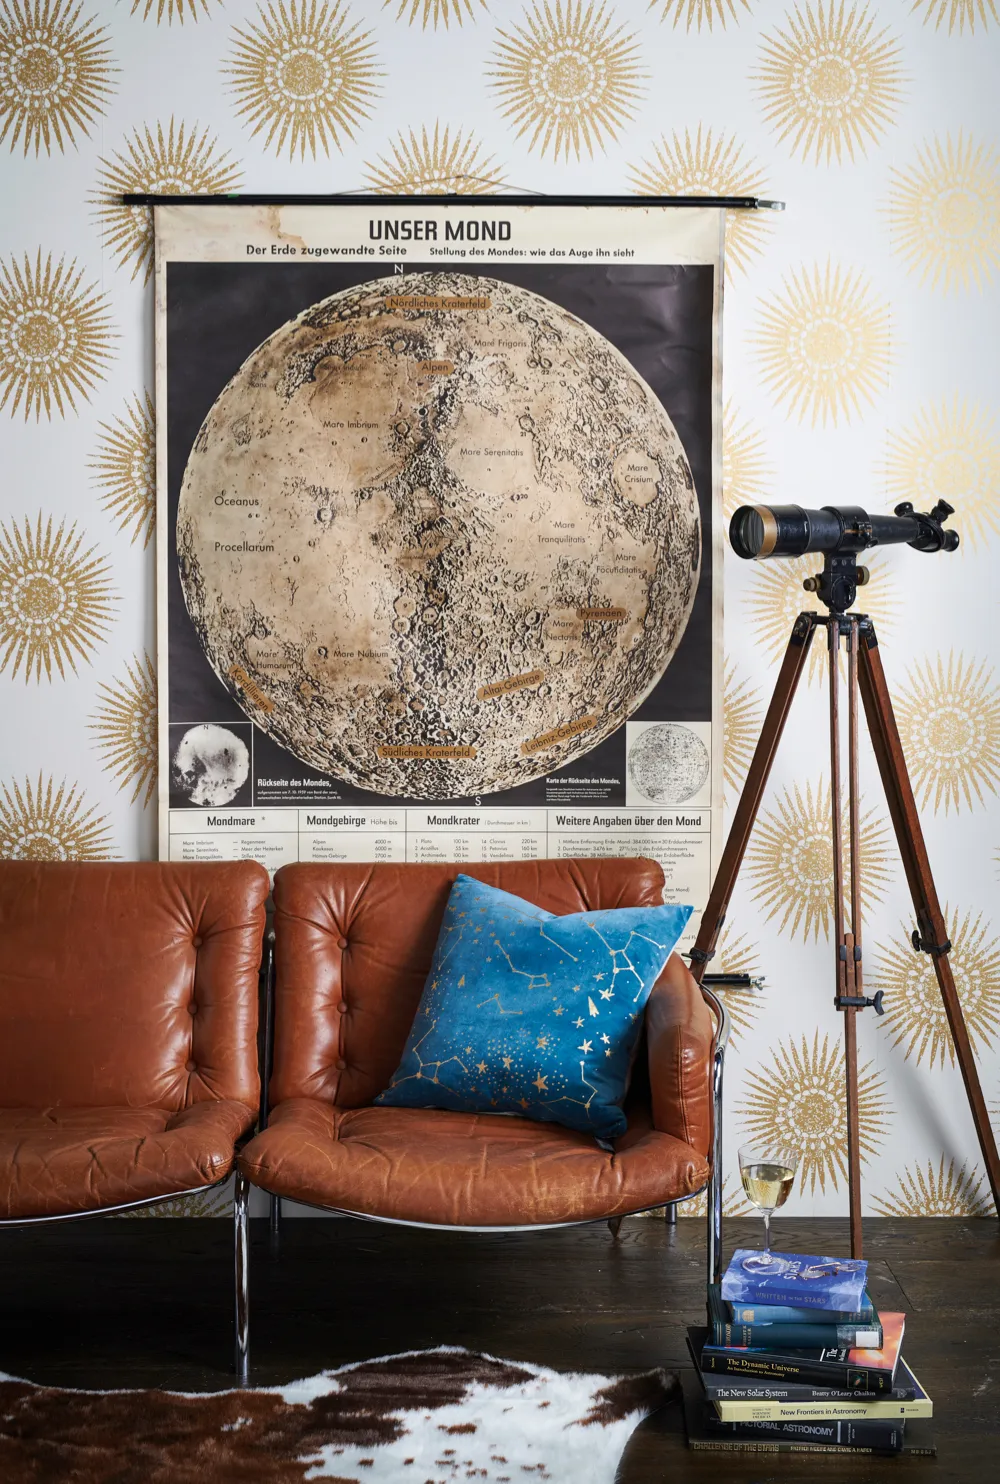 A retro vibe wallpaper with worn leather seating and an oversized chart